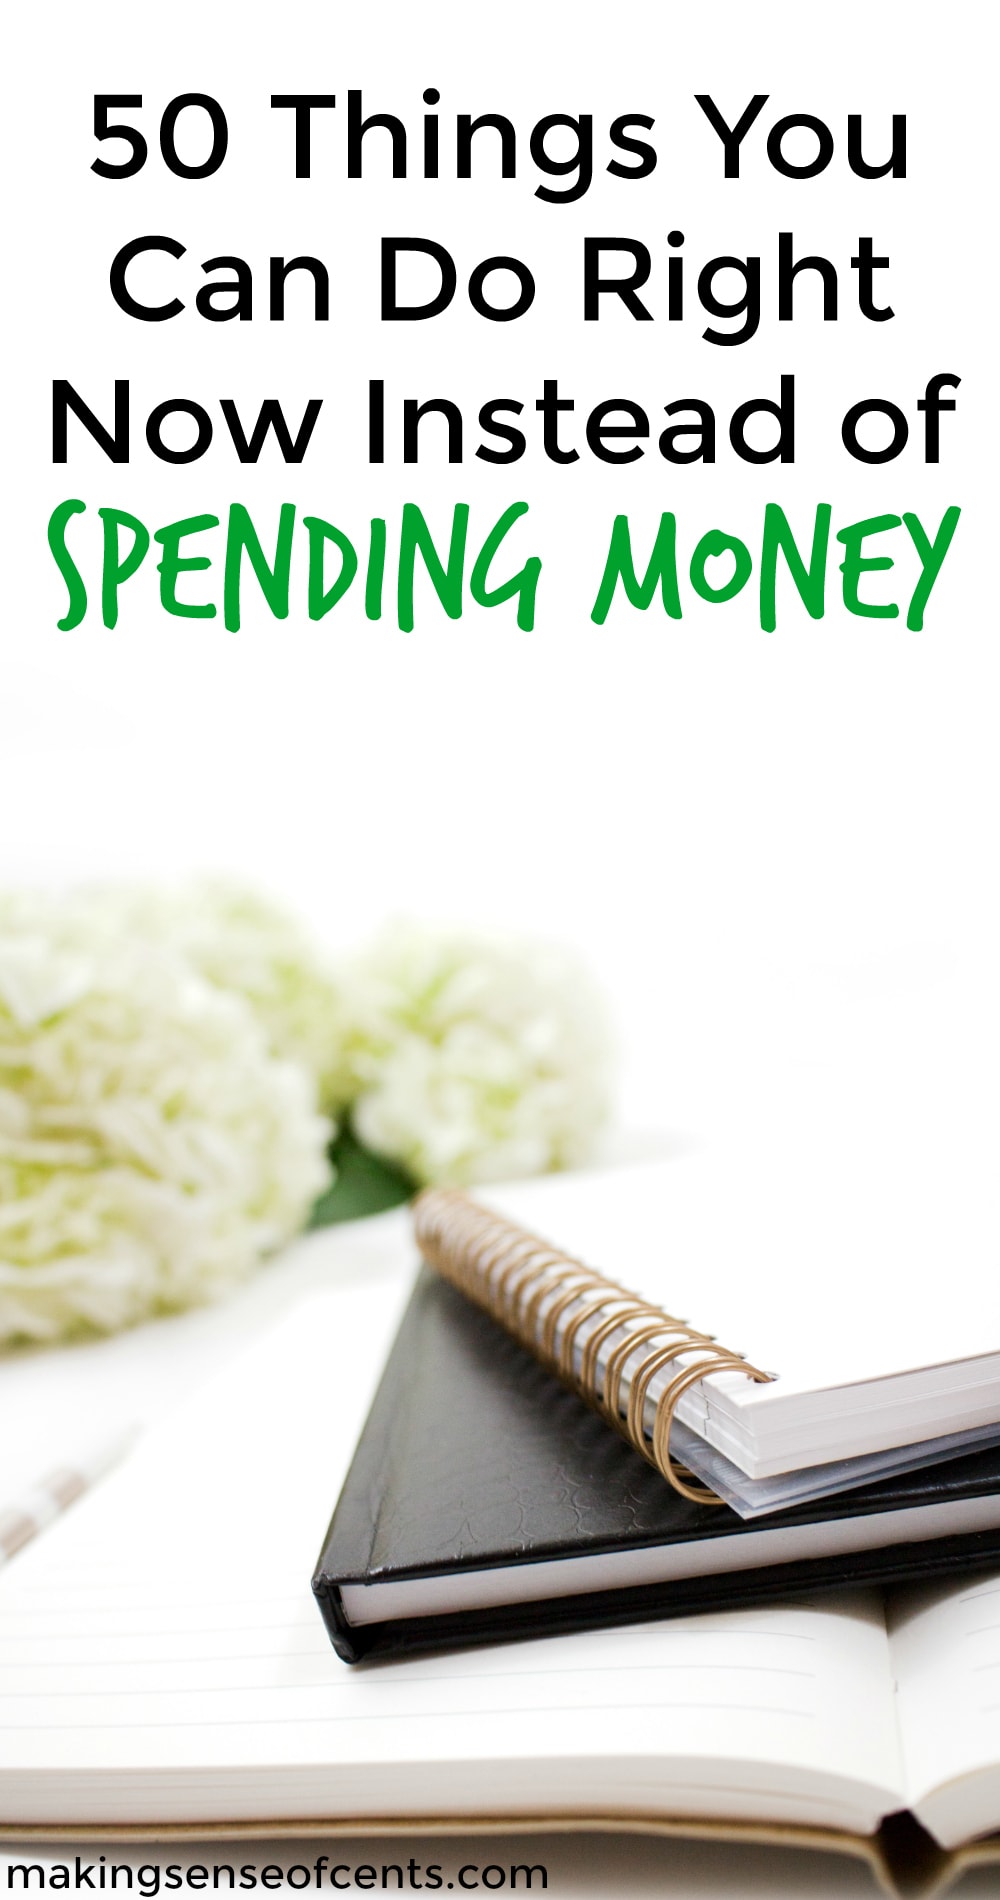 50 Things You Can Do Right Now Instead Of Spending Money - 